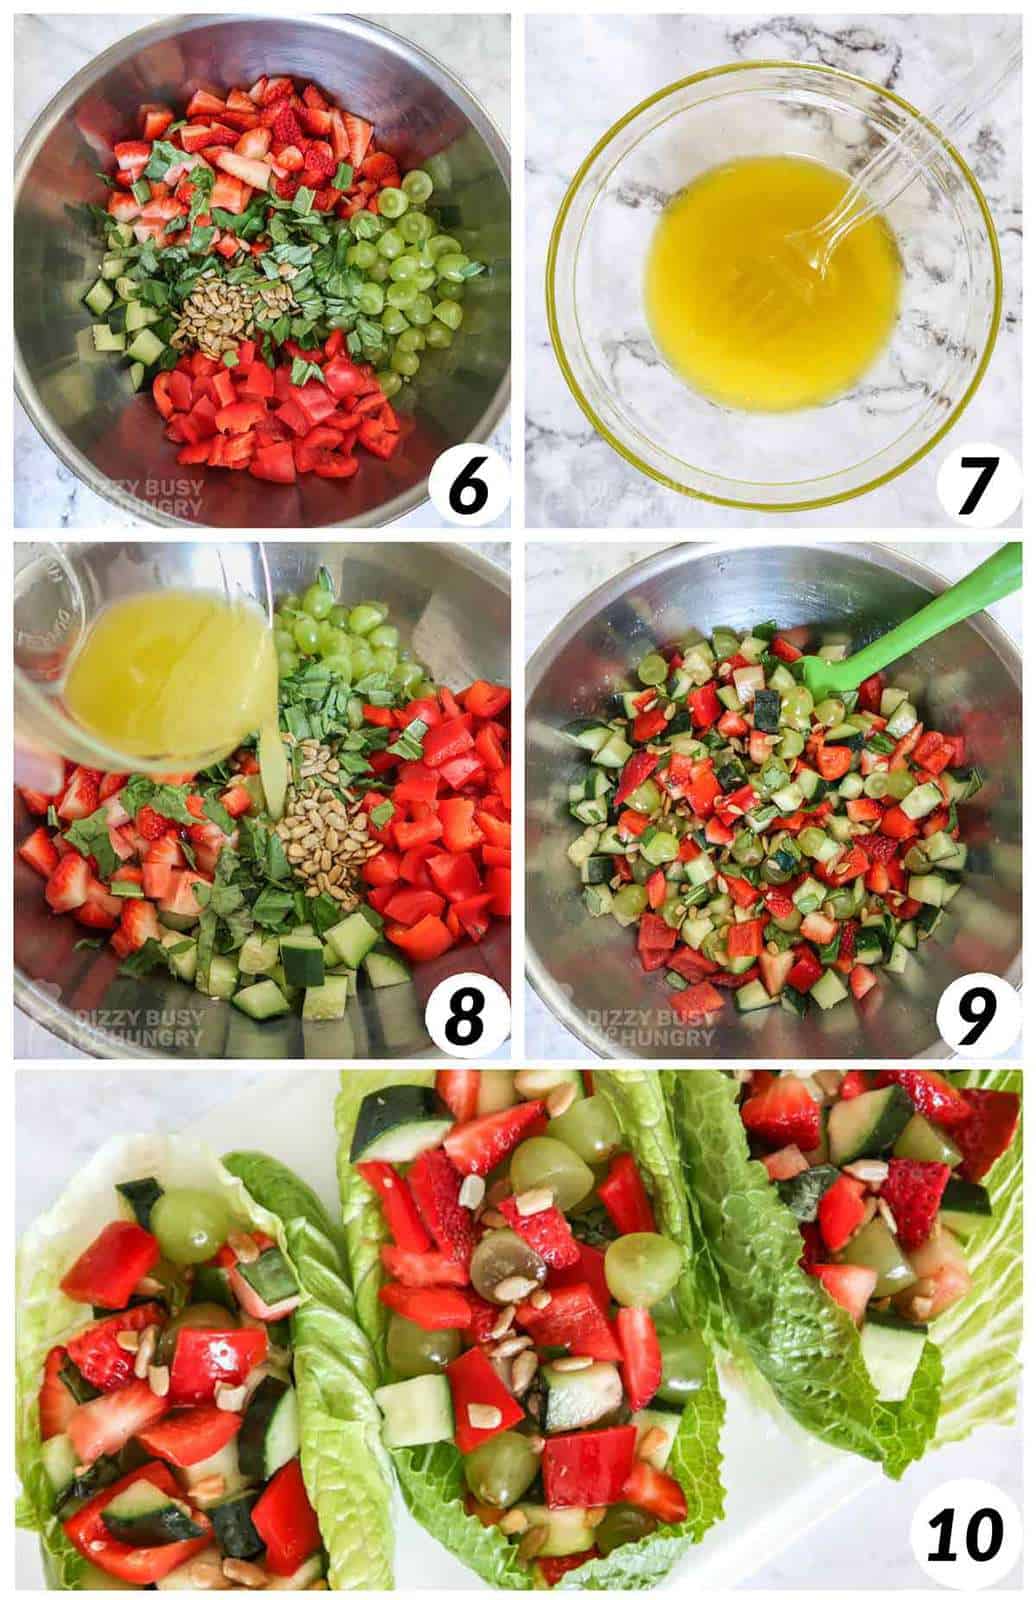 Five photos in a grid showing how to make the salad dressing and combine it with the prepared fresh produce.